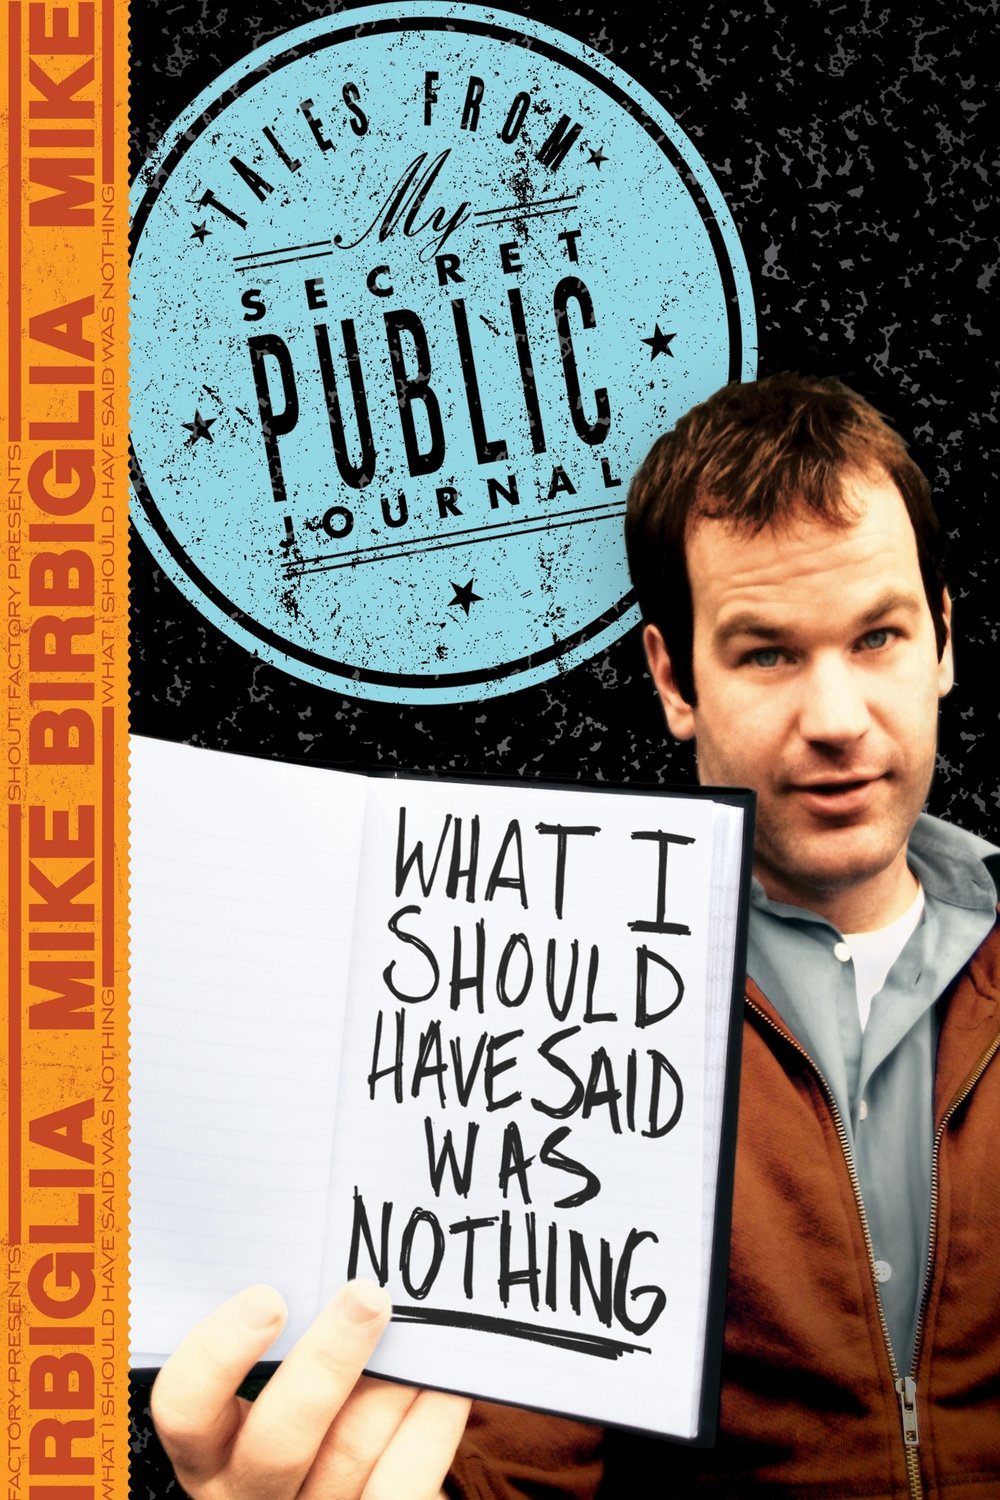 L'affiche du film Mike Birbiglia: What I Should Have Said Was Nothing